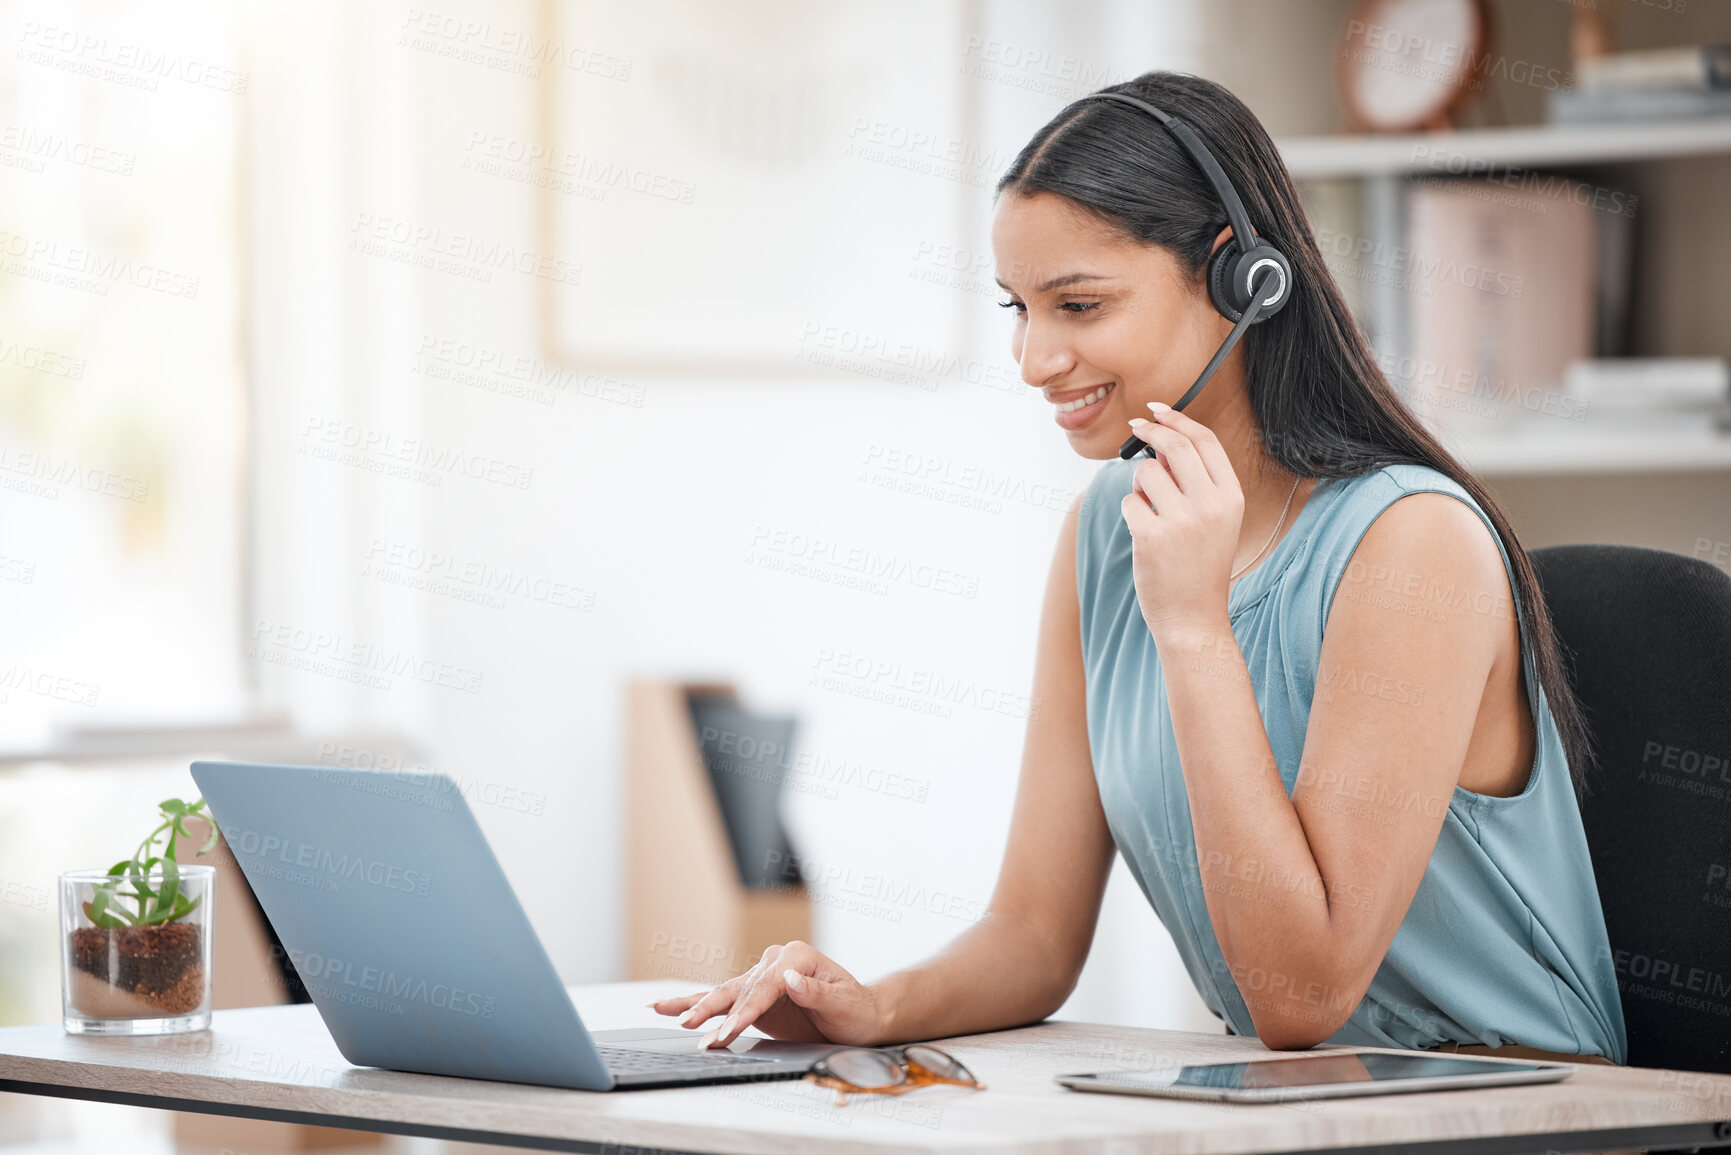 Buy stock photo Telemarketing, laptop and happy business woman reading contact center info, callcenter feedback or tech support. Help desk customer care, sales numbers and telecom agent consulting on lead generation